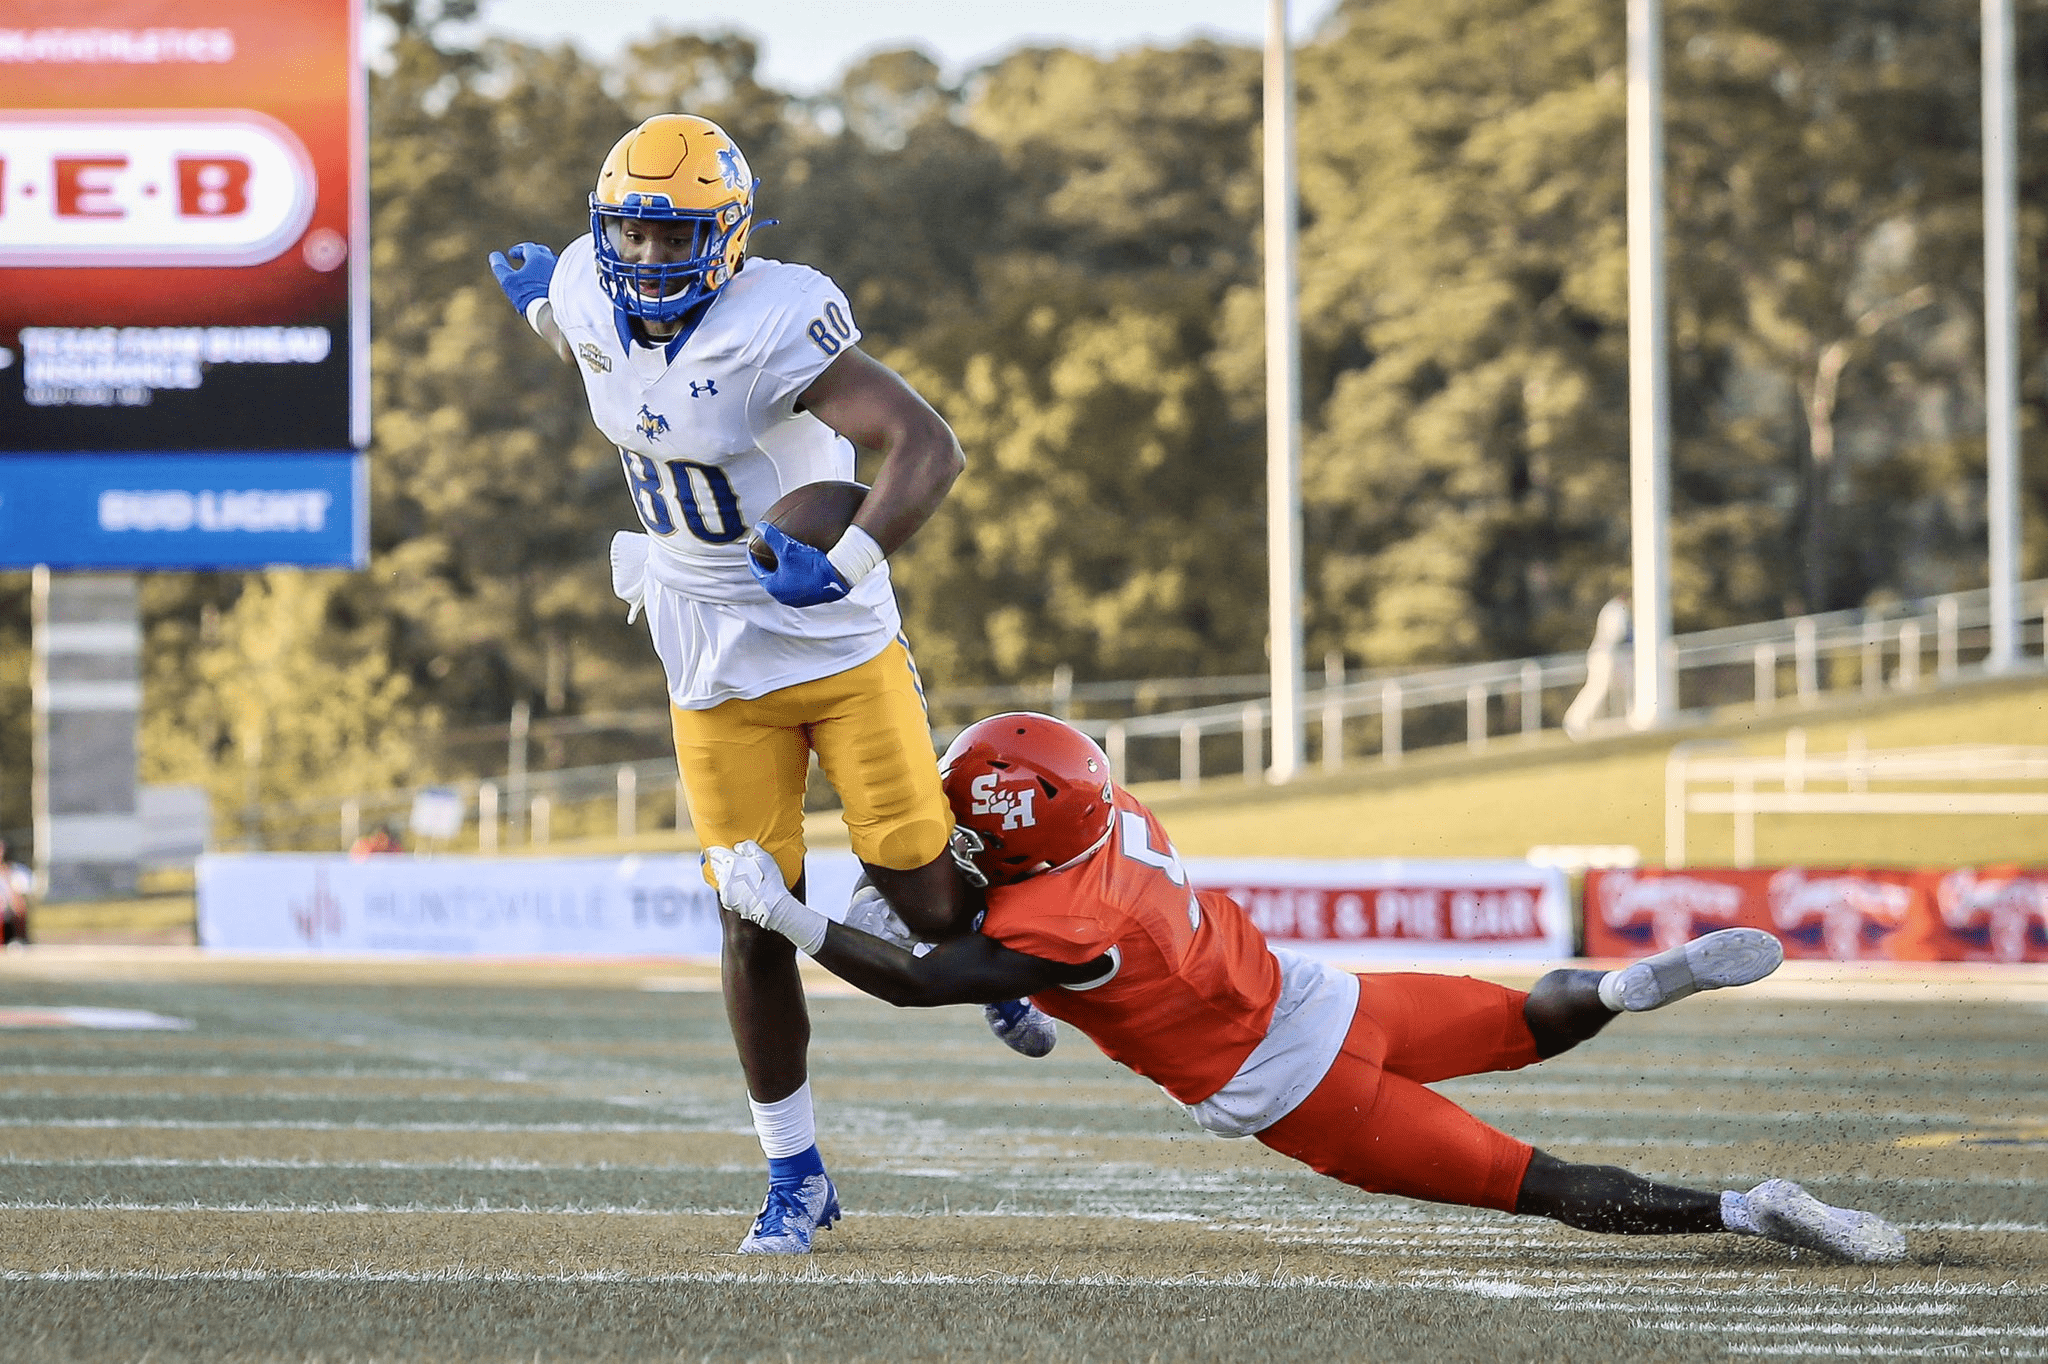 Jamal Pettigrew has been a reliable target at McNeese State as their tight-end since transferring over from LSU. He recently sat down with NFL Draft Diamonds writer Jimmy Williams.